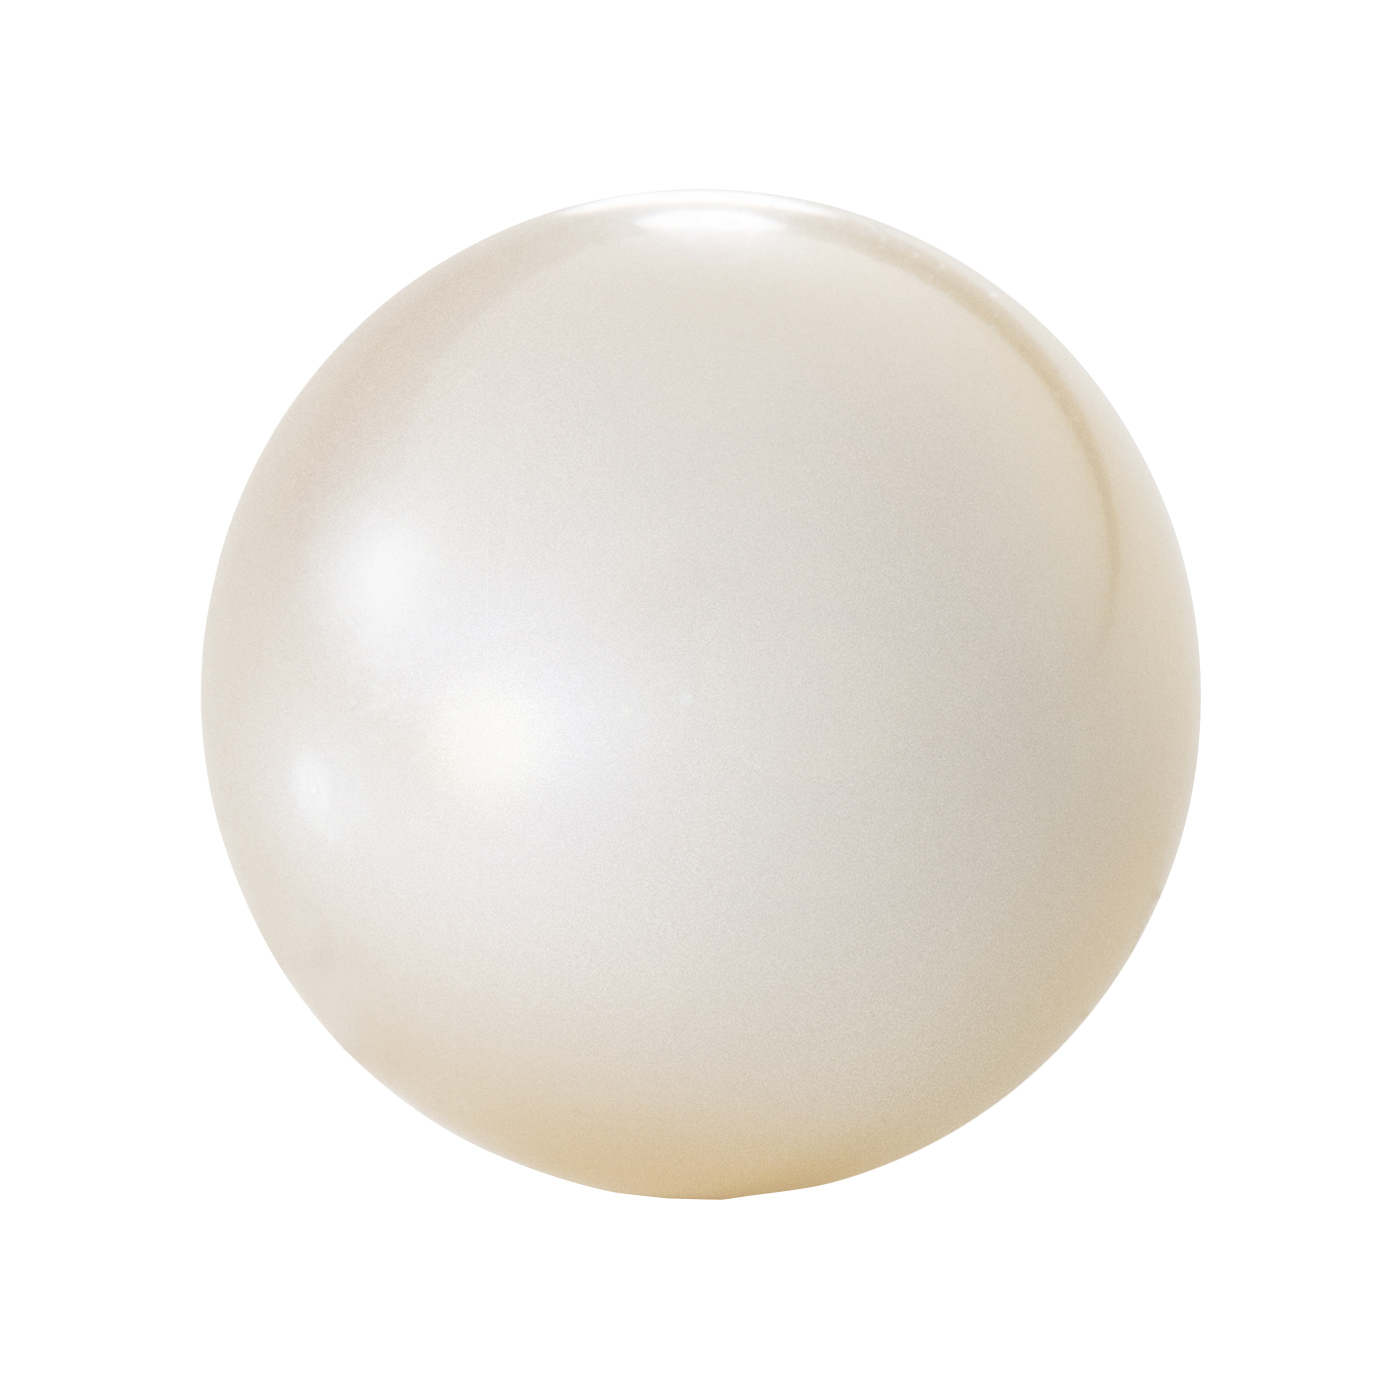 Cultured Pearl, Freshwater, 4/4, ø 6.5-7.0 mm, White - 1 piece